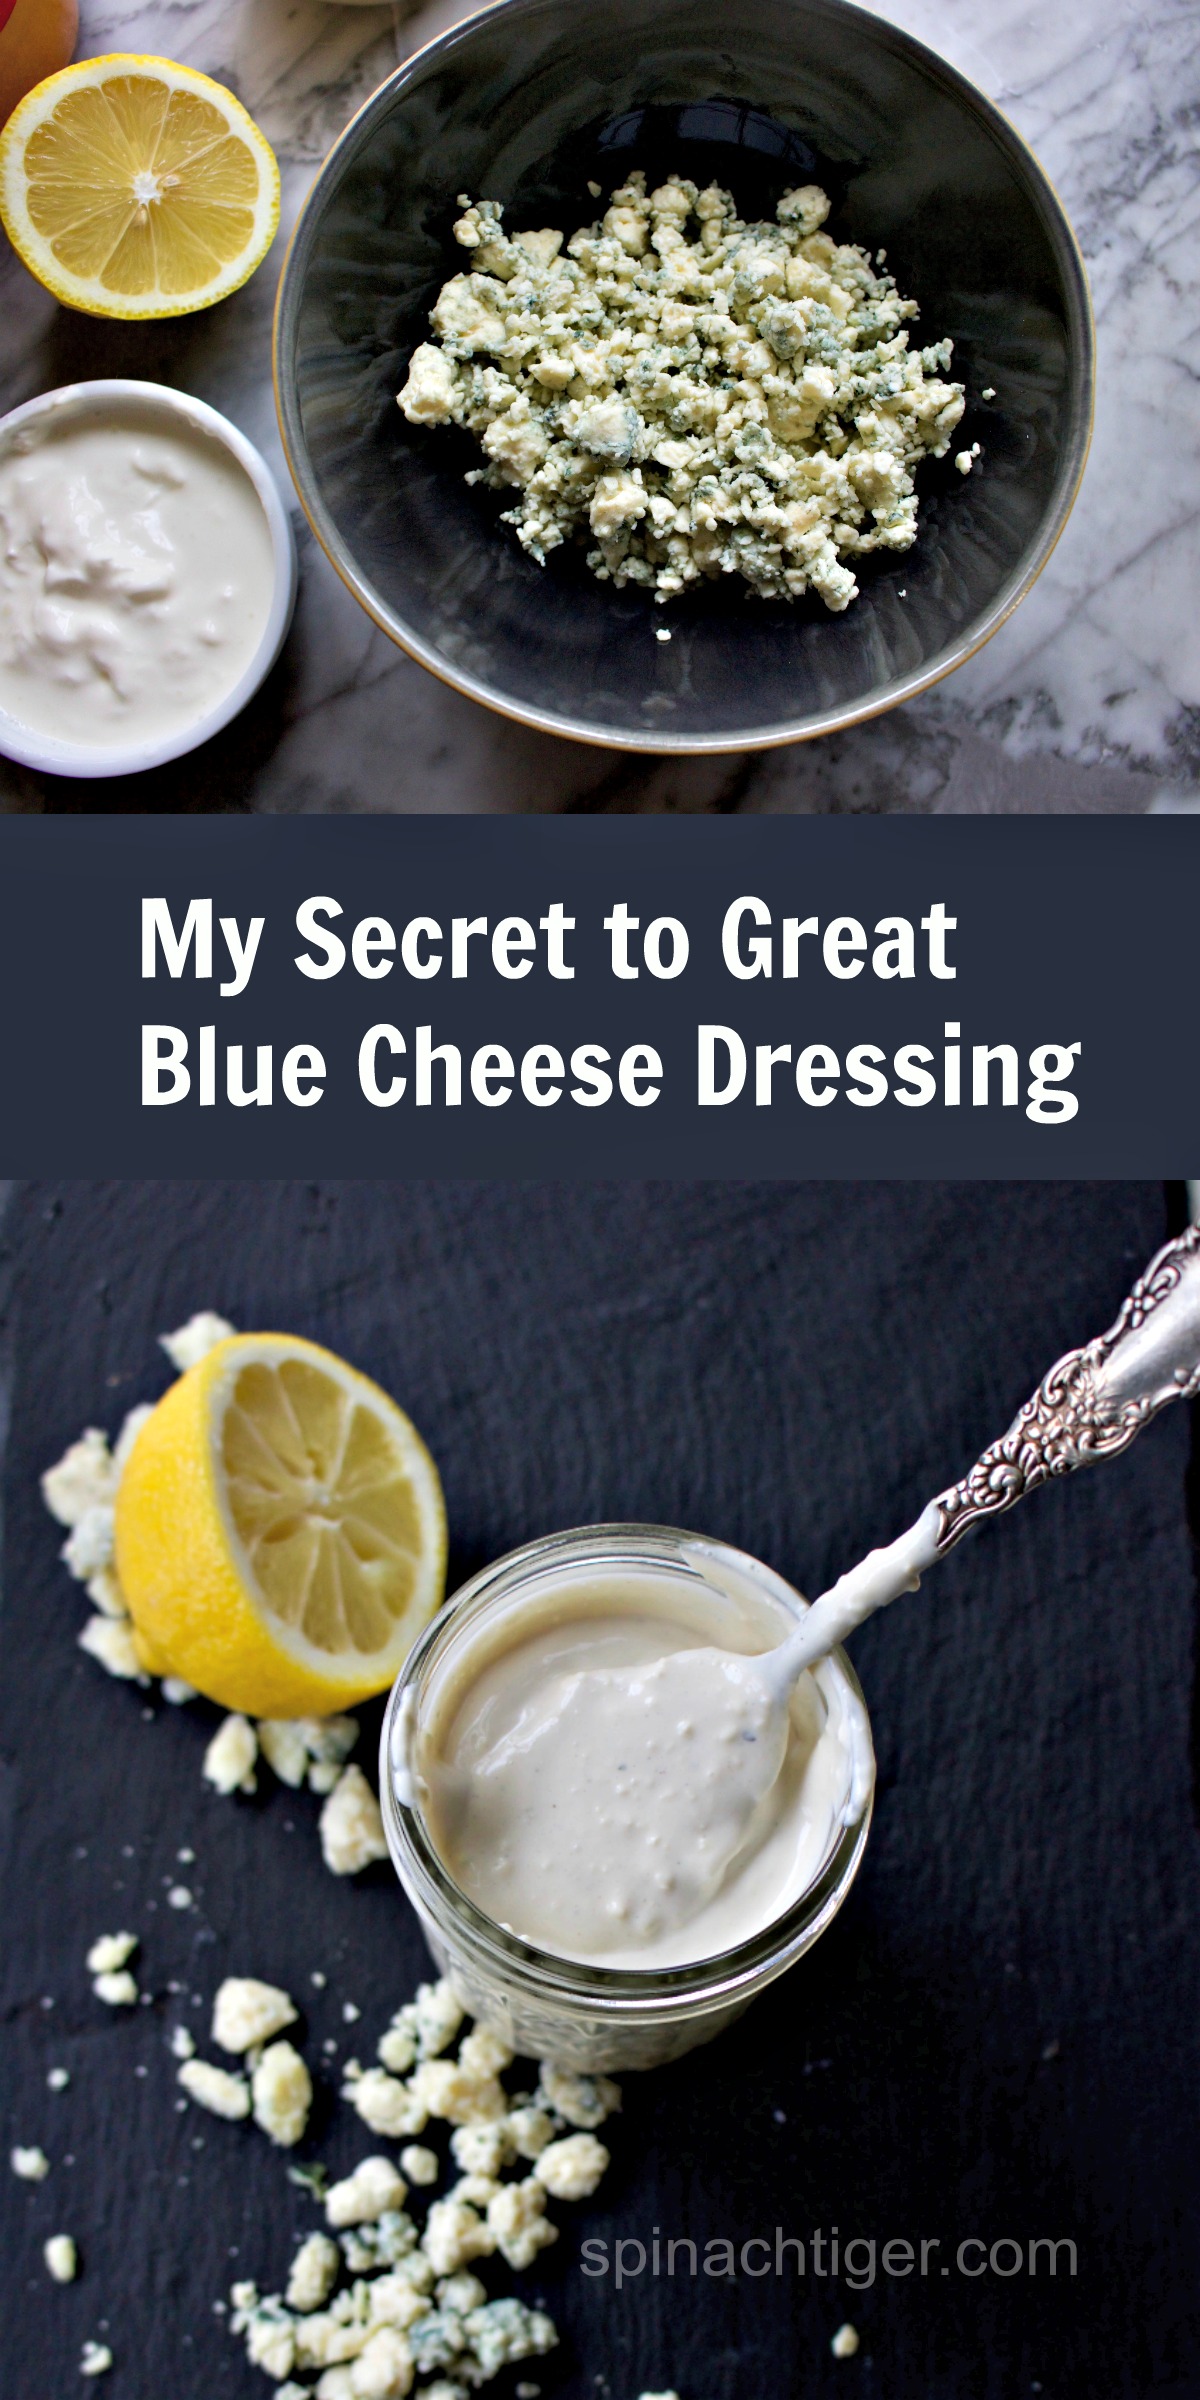 Secret to best blue cheese dressing from spinach tiger